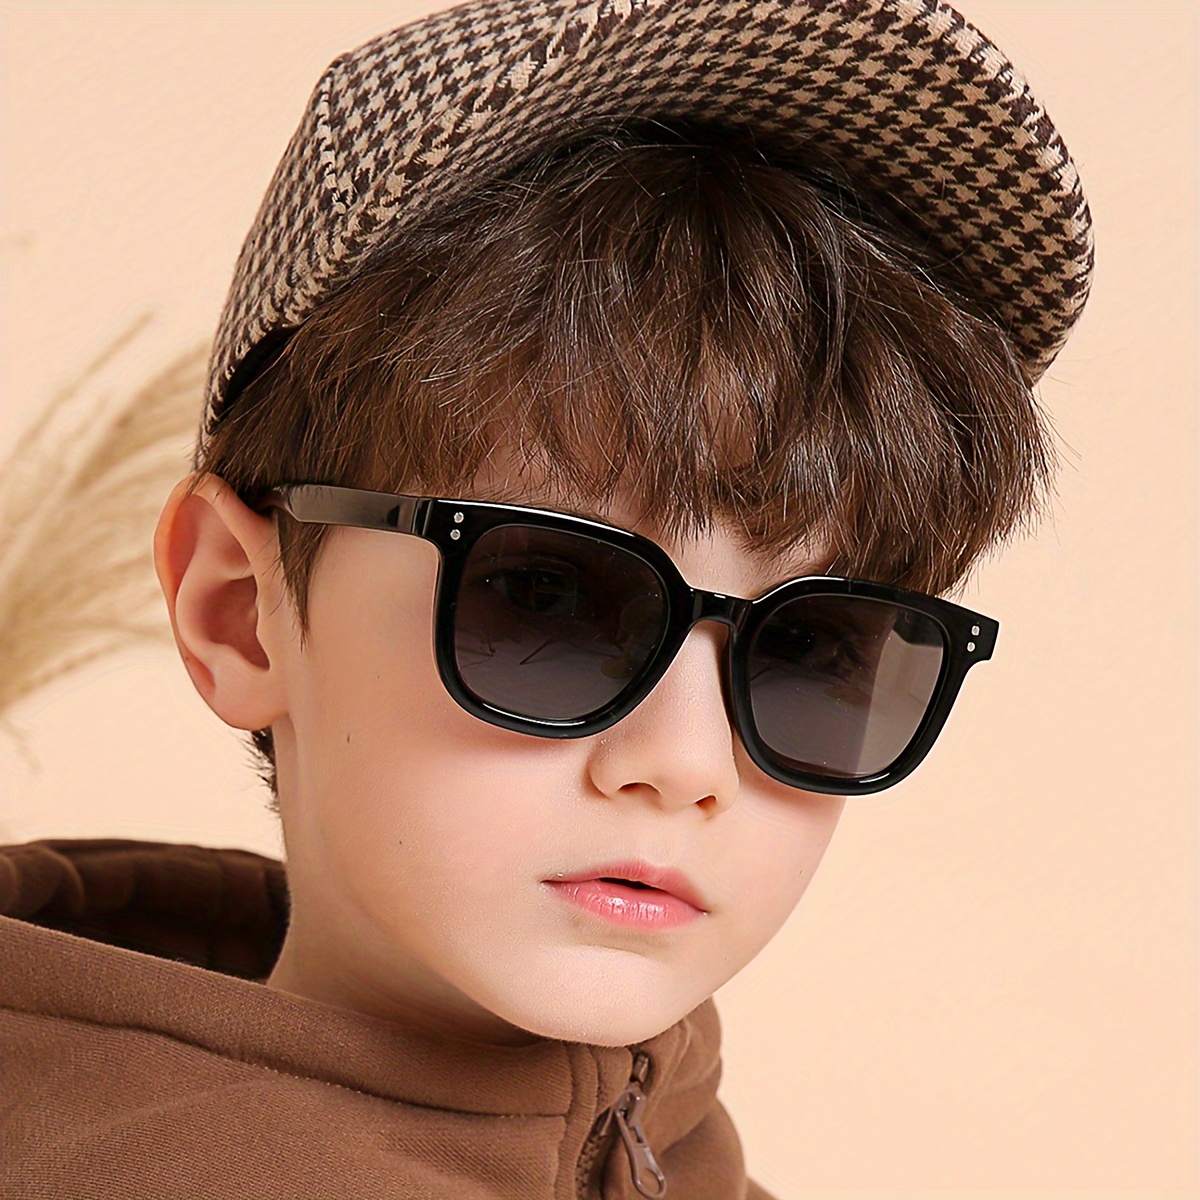 

Sweet Lovely Classic Versatile Square Frame Fashion Glasses, For Boys Girls Outdoor Sports Party Vacation Travel Supply Photo Prop